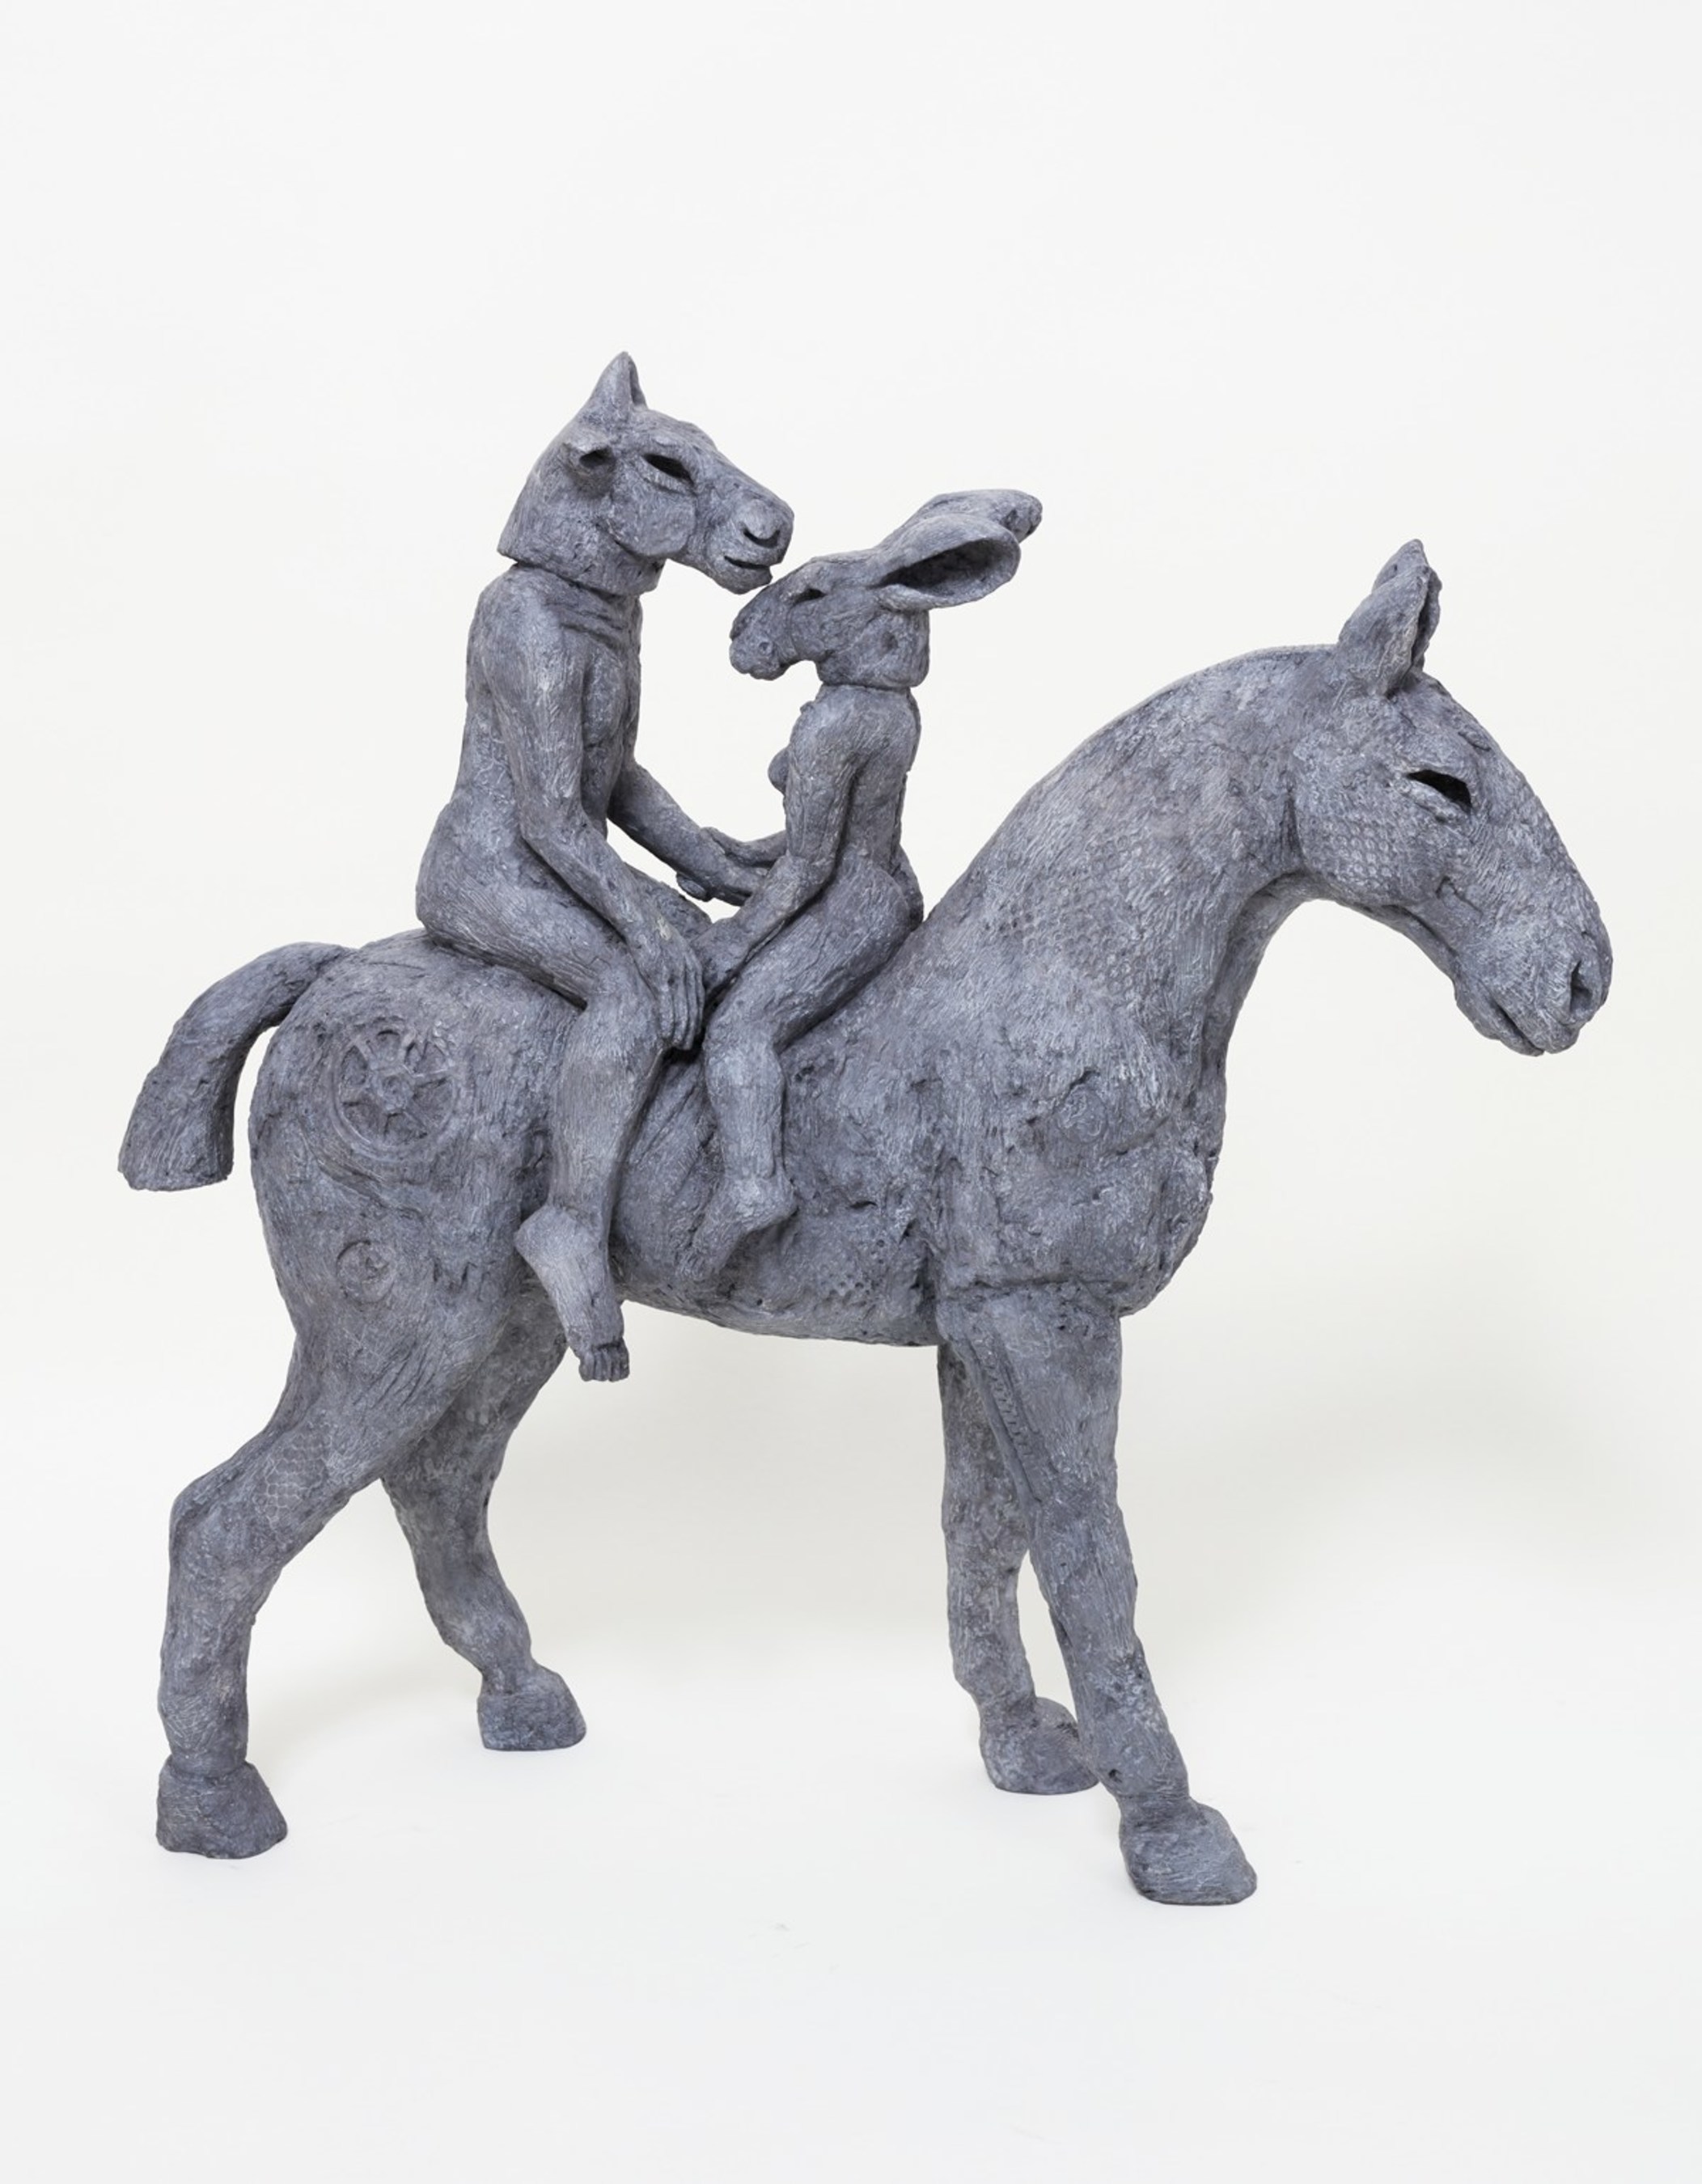 "Lovers on Horseback" by Sophie Ryder 2013  Bronze  23 x 23 x 8 inches Edition of 9